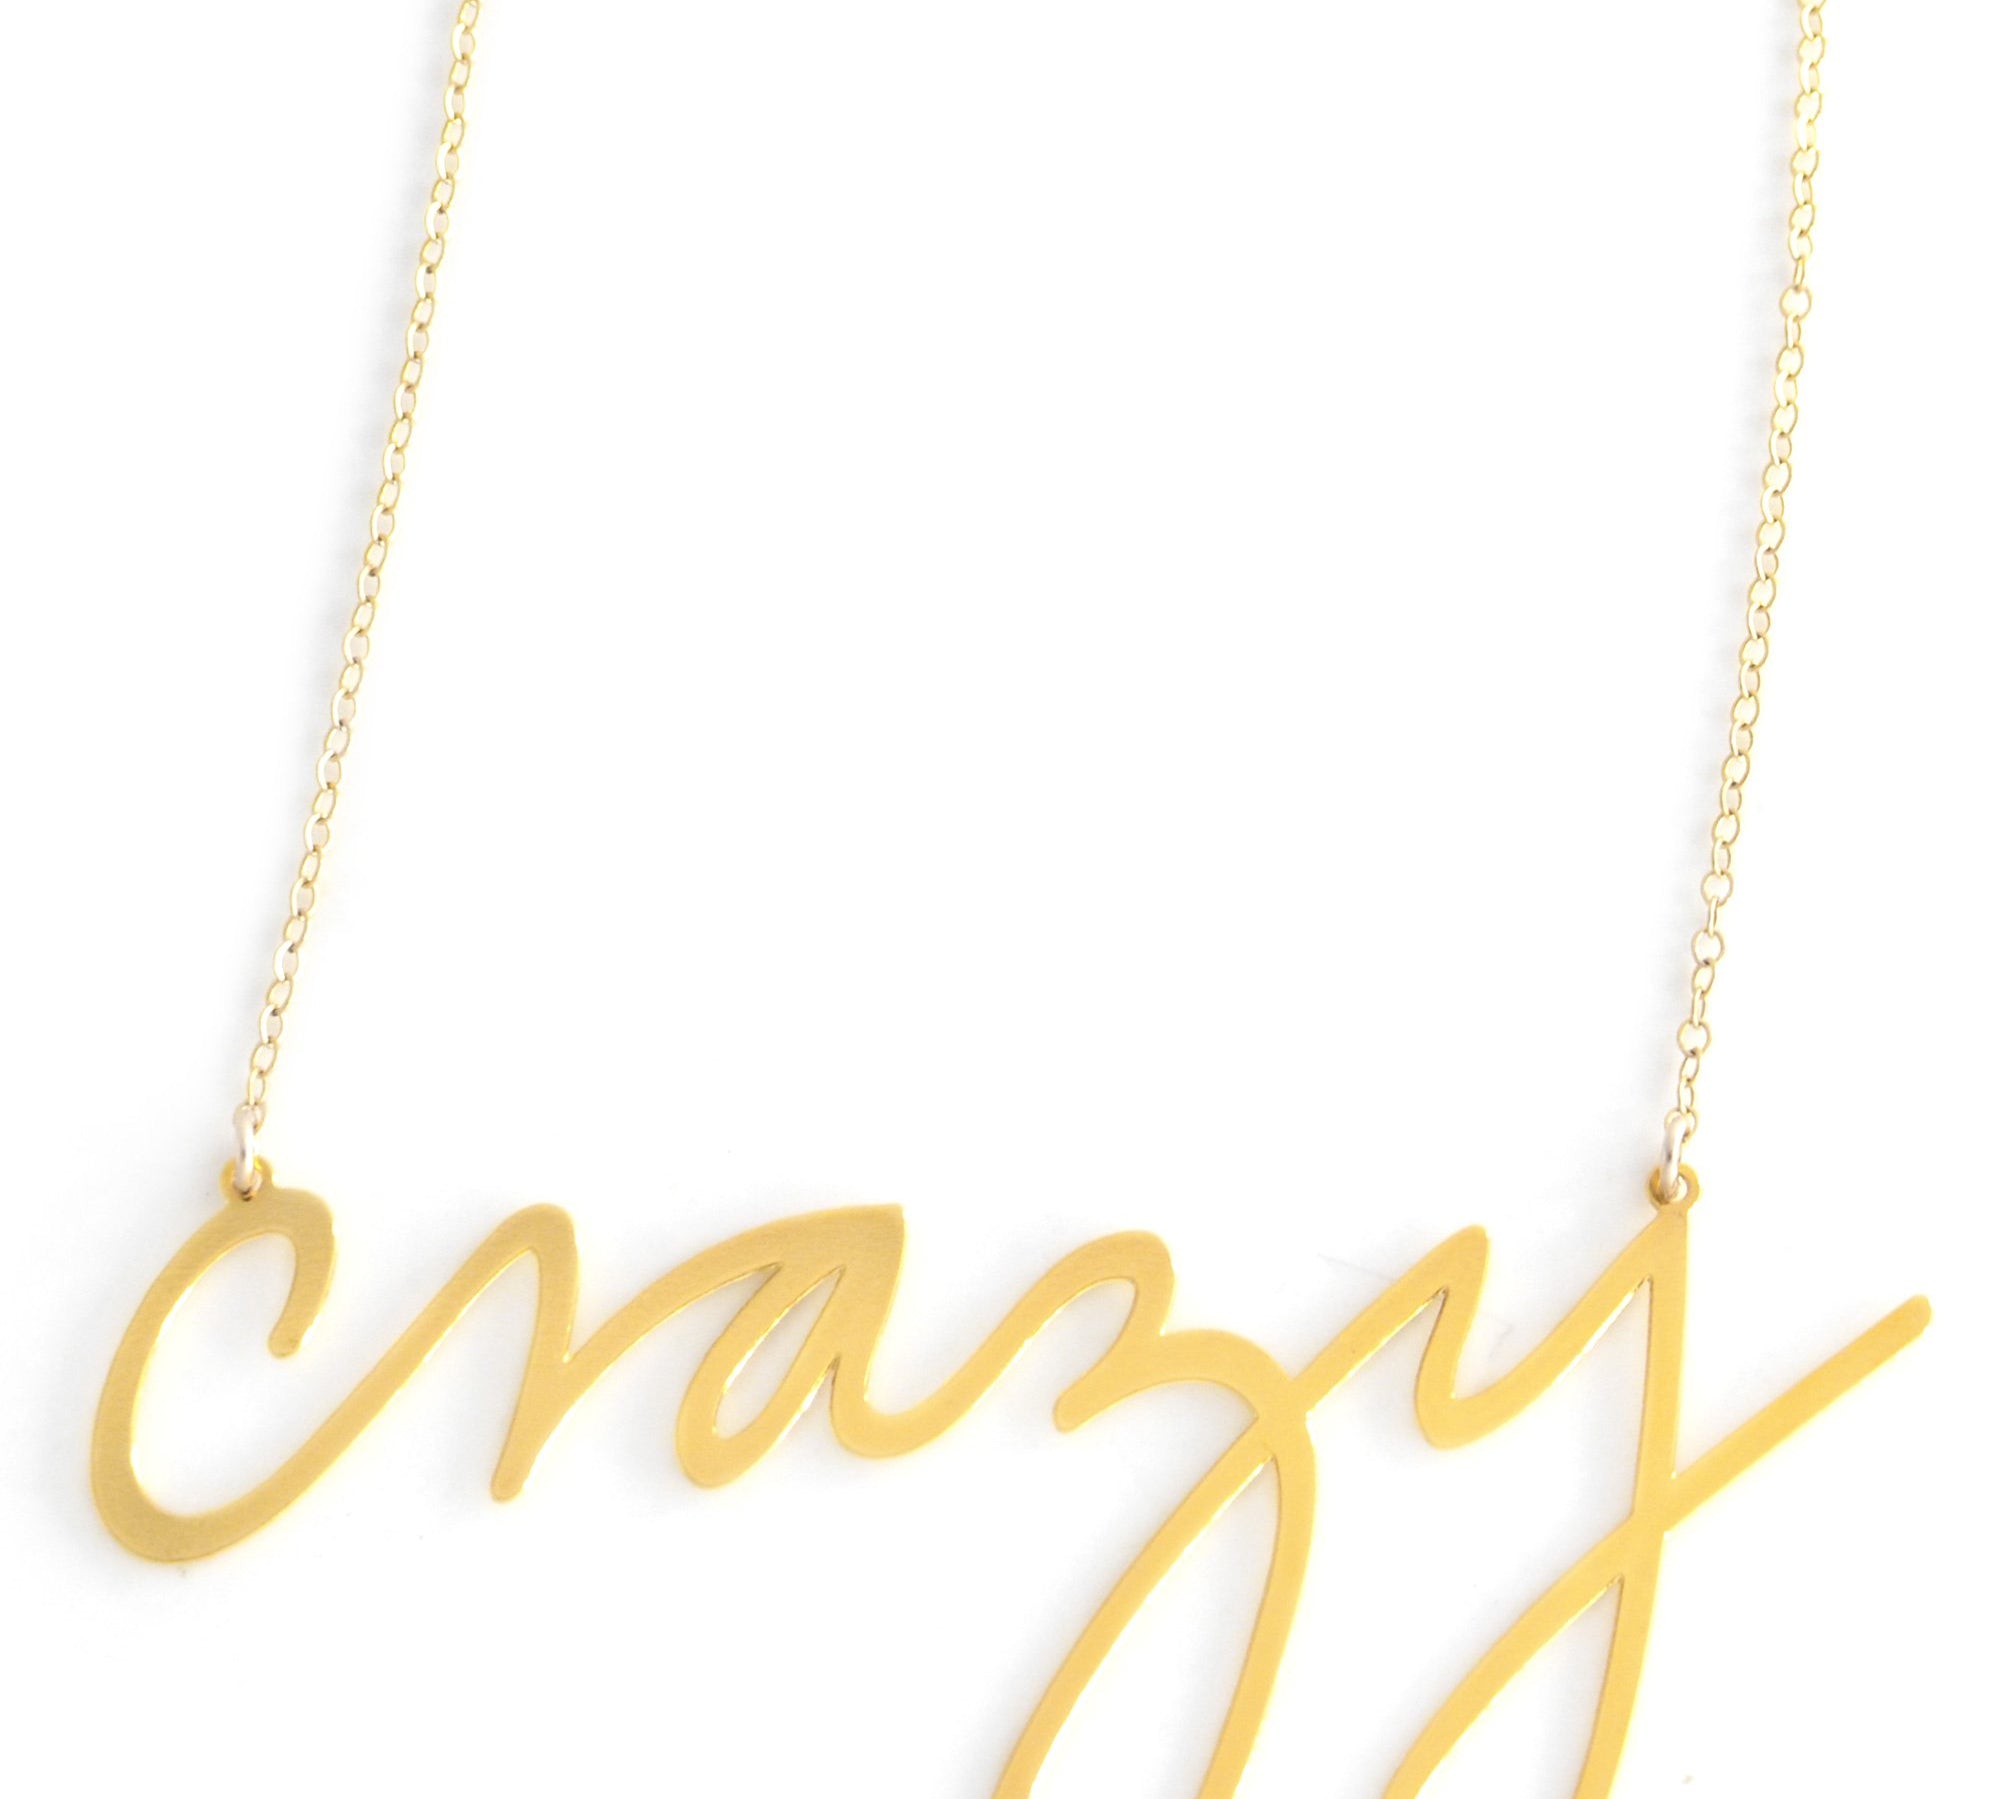 Crazy Necklace - High Quality, Affordable, Hand Written, Self Love, Mantra Word Necklace - Available in Gold and Silver - Small and Large Sizes - Made in USA - Brevity Jewelry